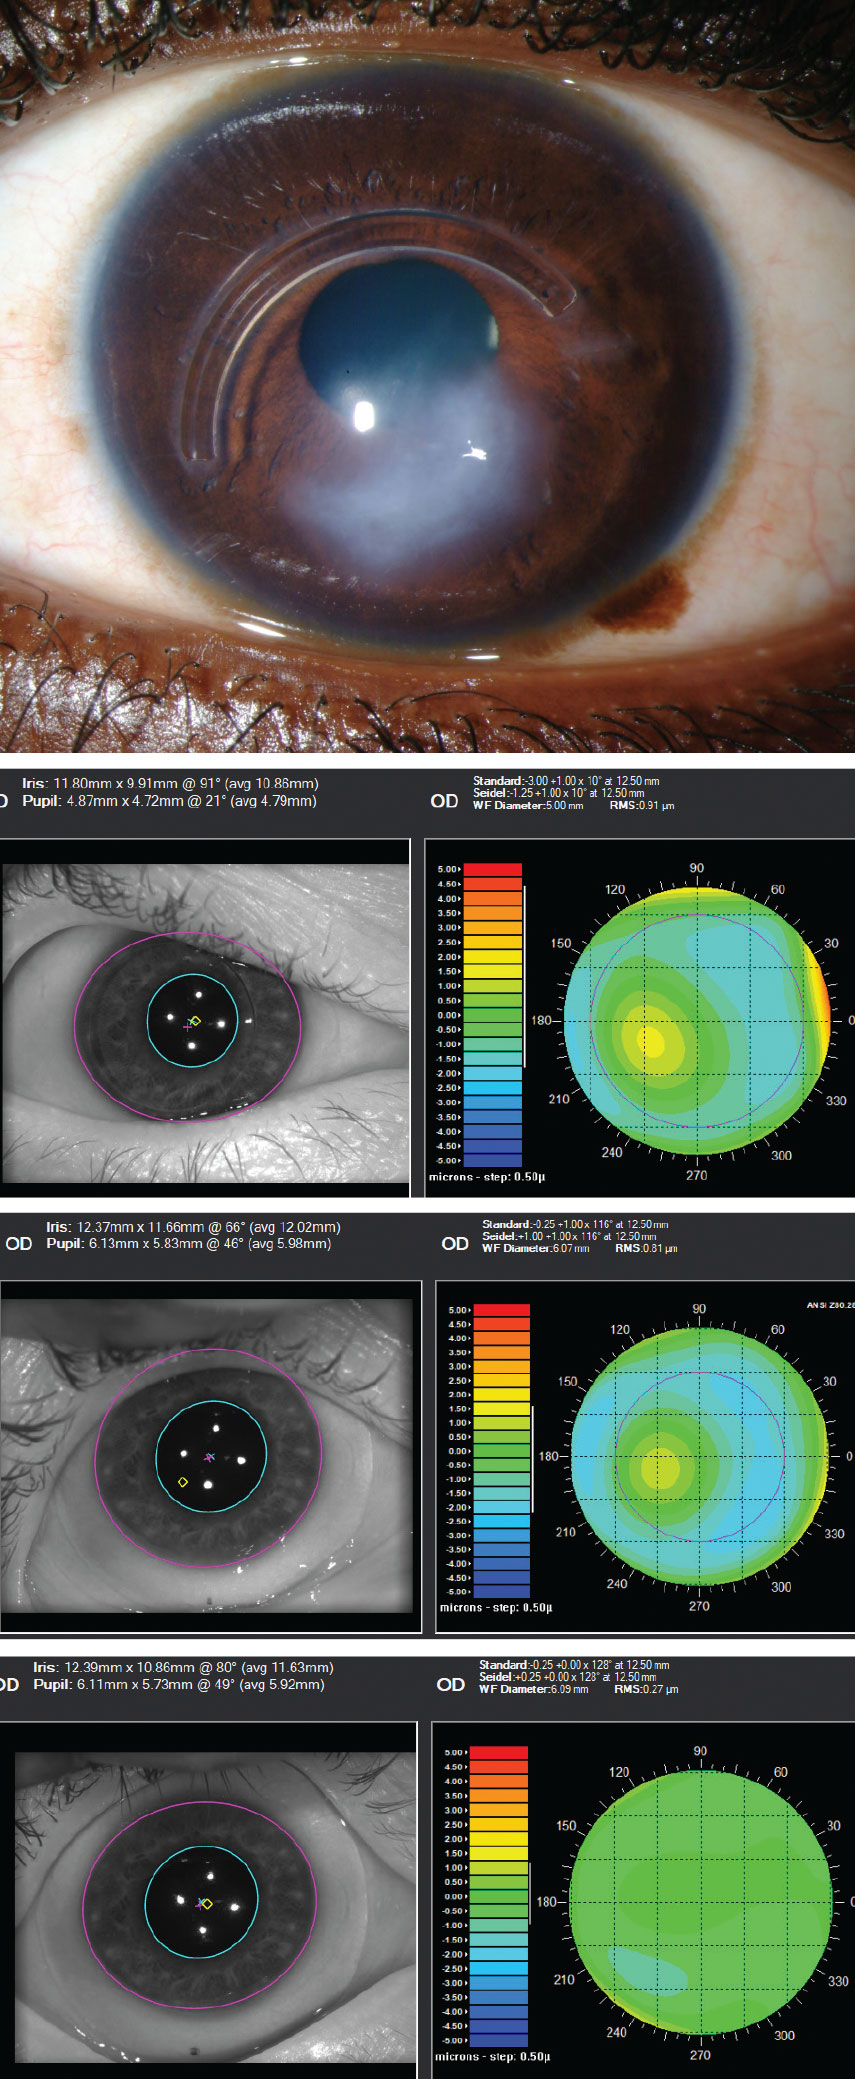 This series shows an advanced keratoconus patient with Intacs ring implantation and significant scarring. First image: slit lamp appearance. Second image: the impact of higher-order aberrations without correction (0.91µm@5mm pupil). Third image: aberrations remain with scleral lens wear (0.81µm@6mm pupil). Fourth image: aberration profile has been improved with use of an HOA-corrected scleral lens (0.27µm@6.09mm pupil).